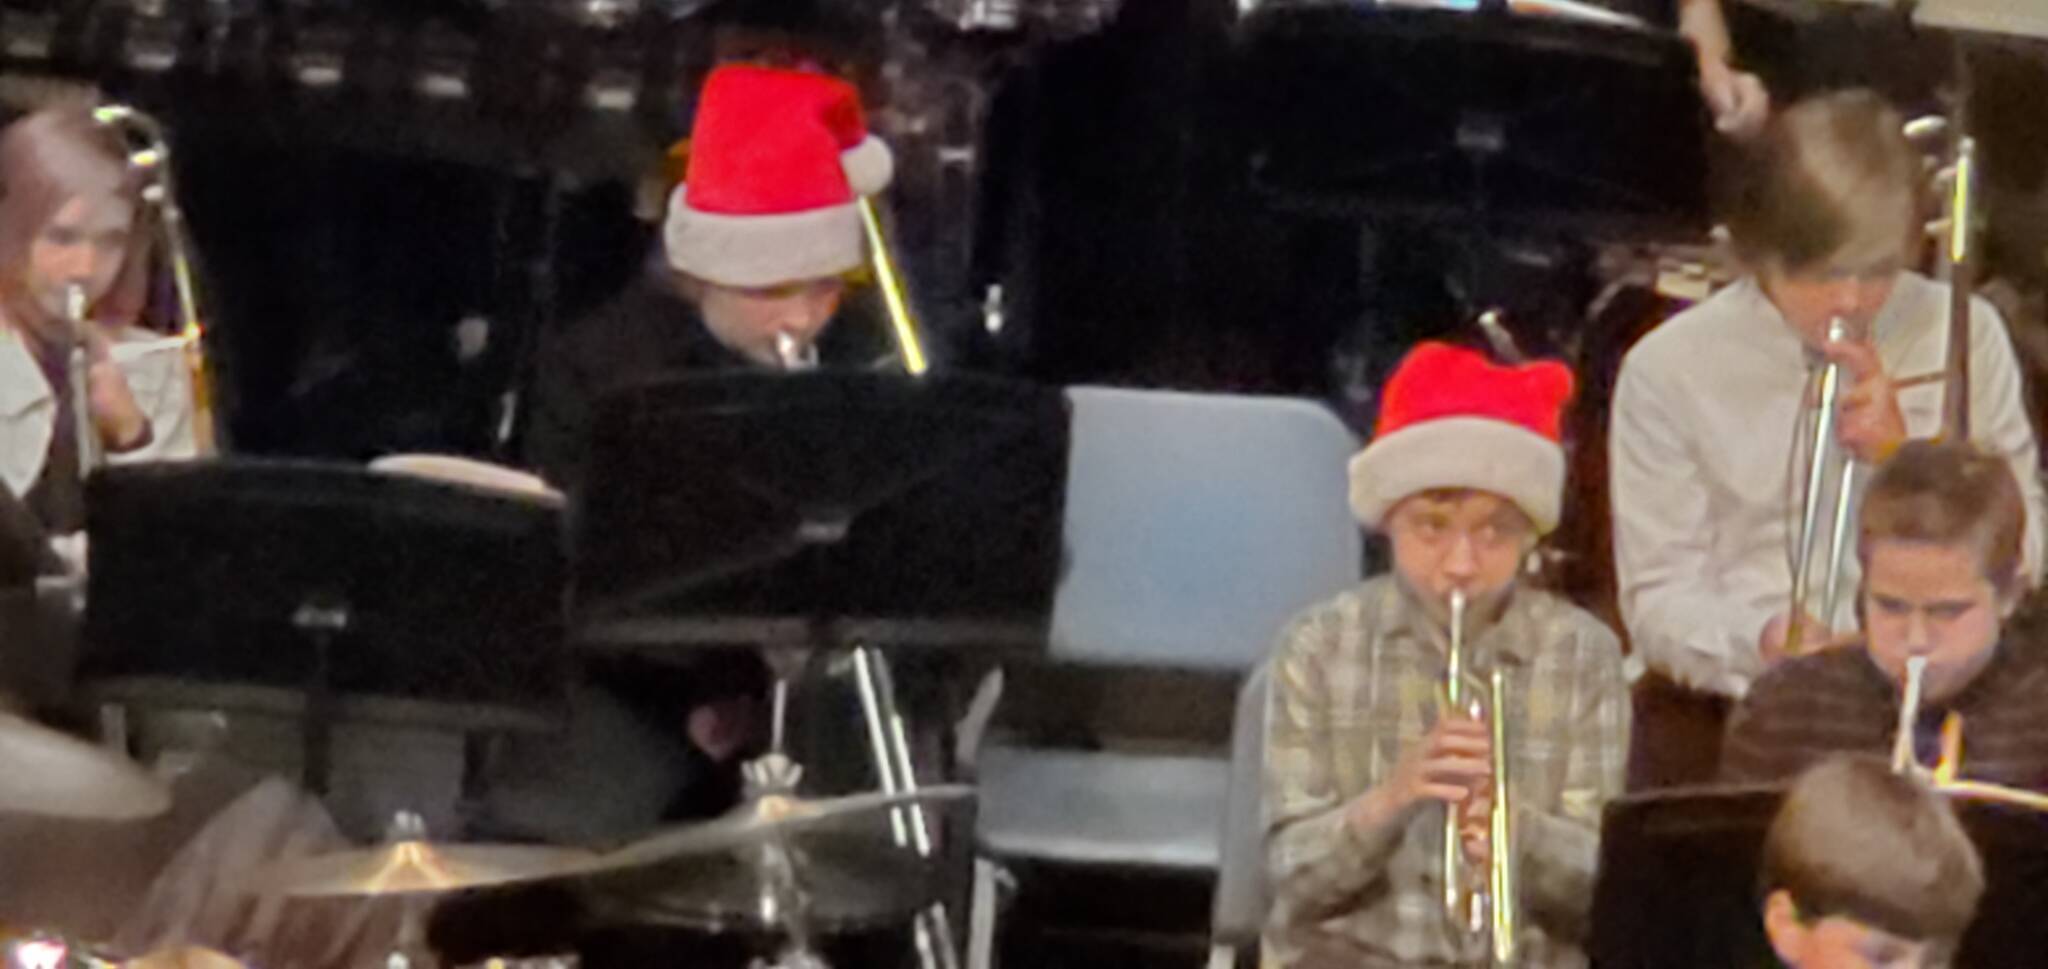 Submitted photo / As part of the Sequim Middle School band, Anthony Ingram plays trombone, seen here at a December show. His grandmother Joanne Tisch said he’s recovered from acute liver failure and bone marrow failure and remains active in a number of organizations.